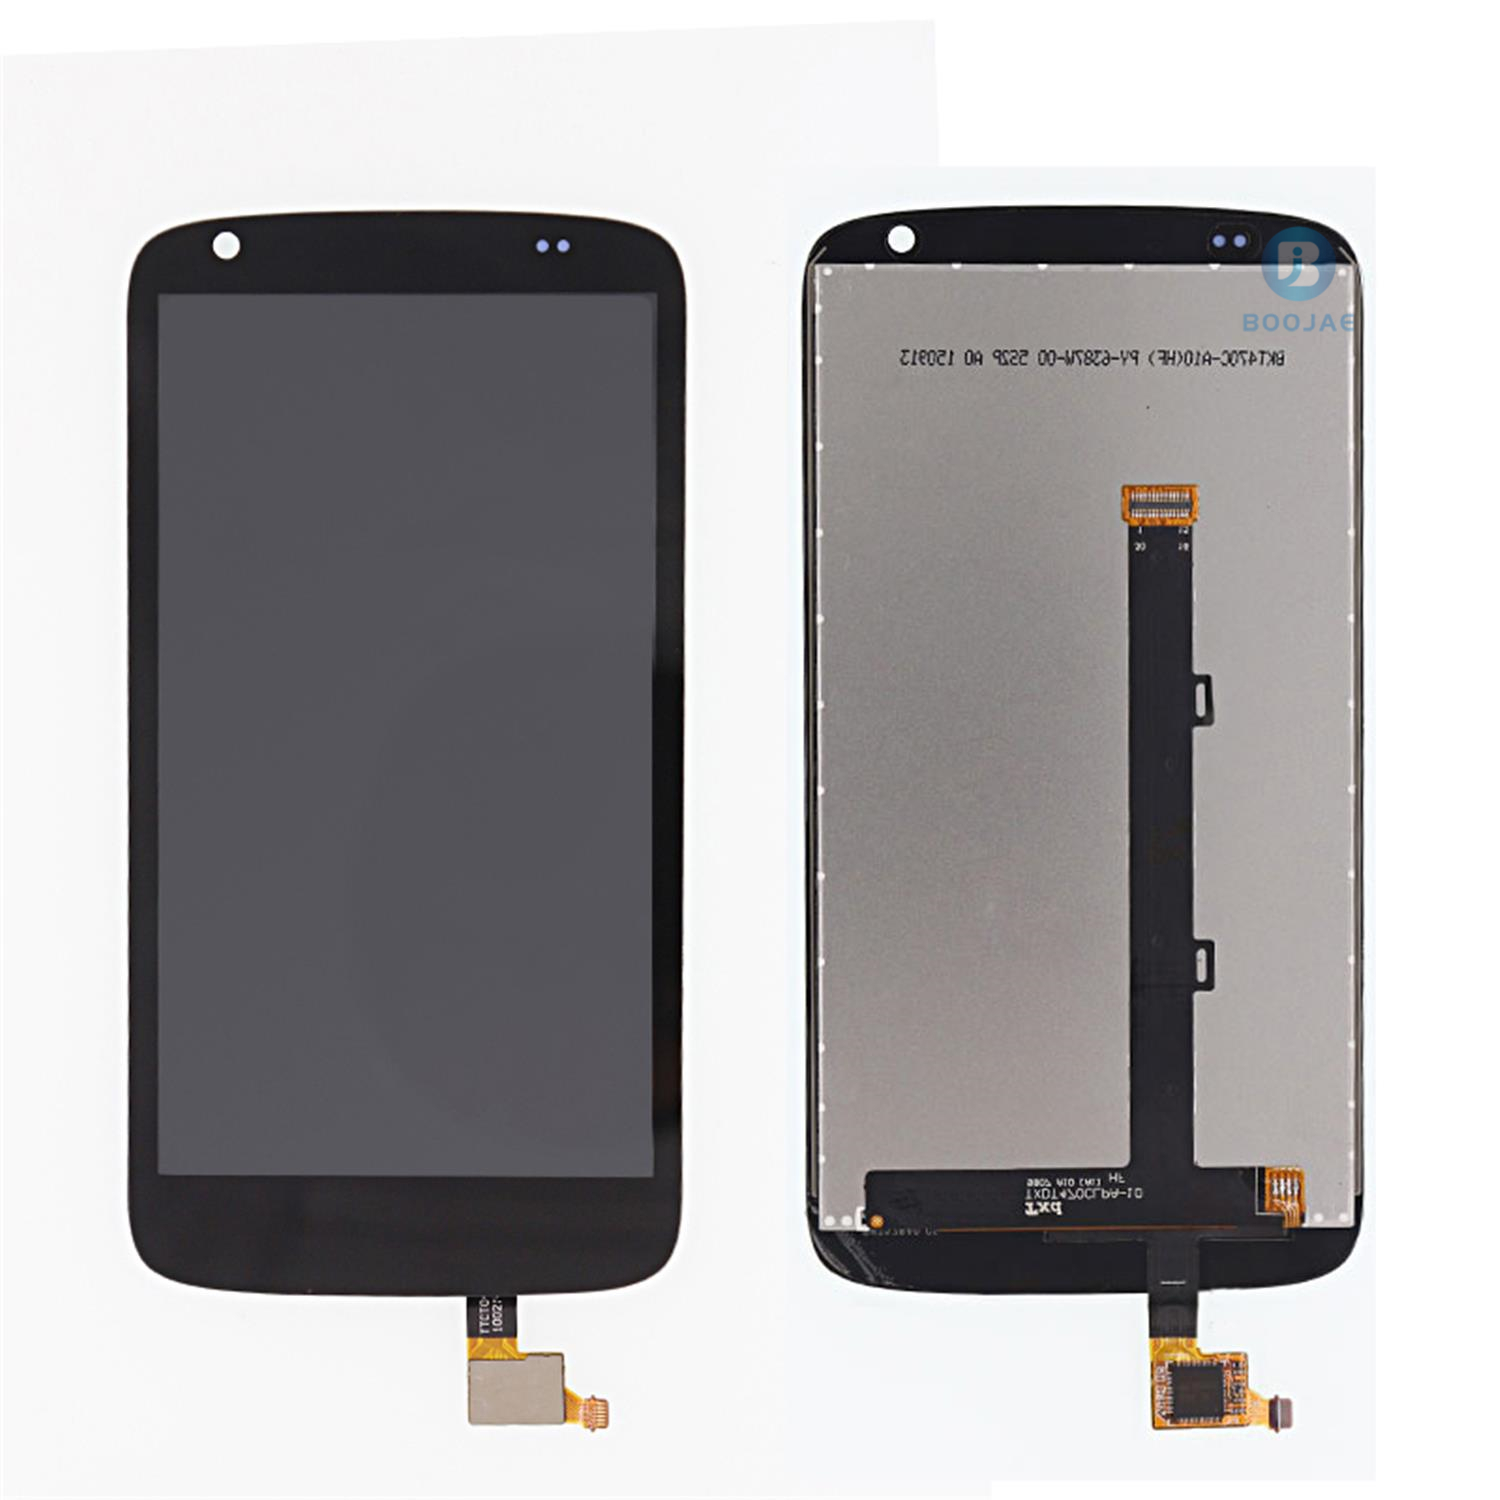 HTC Desire 526 LCD Screen Display , Lcd Assembly Replacement